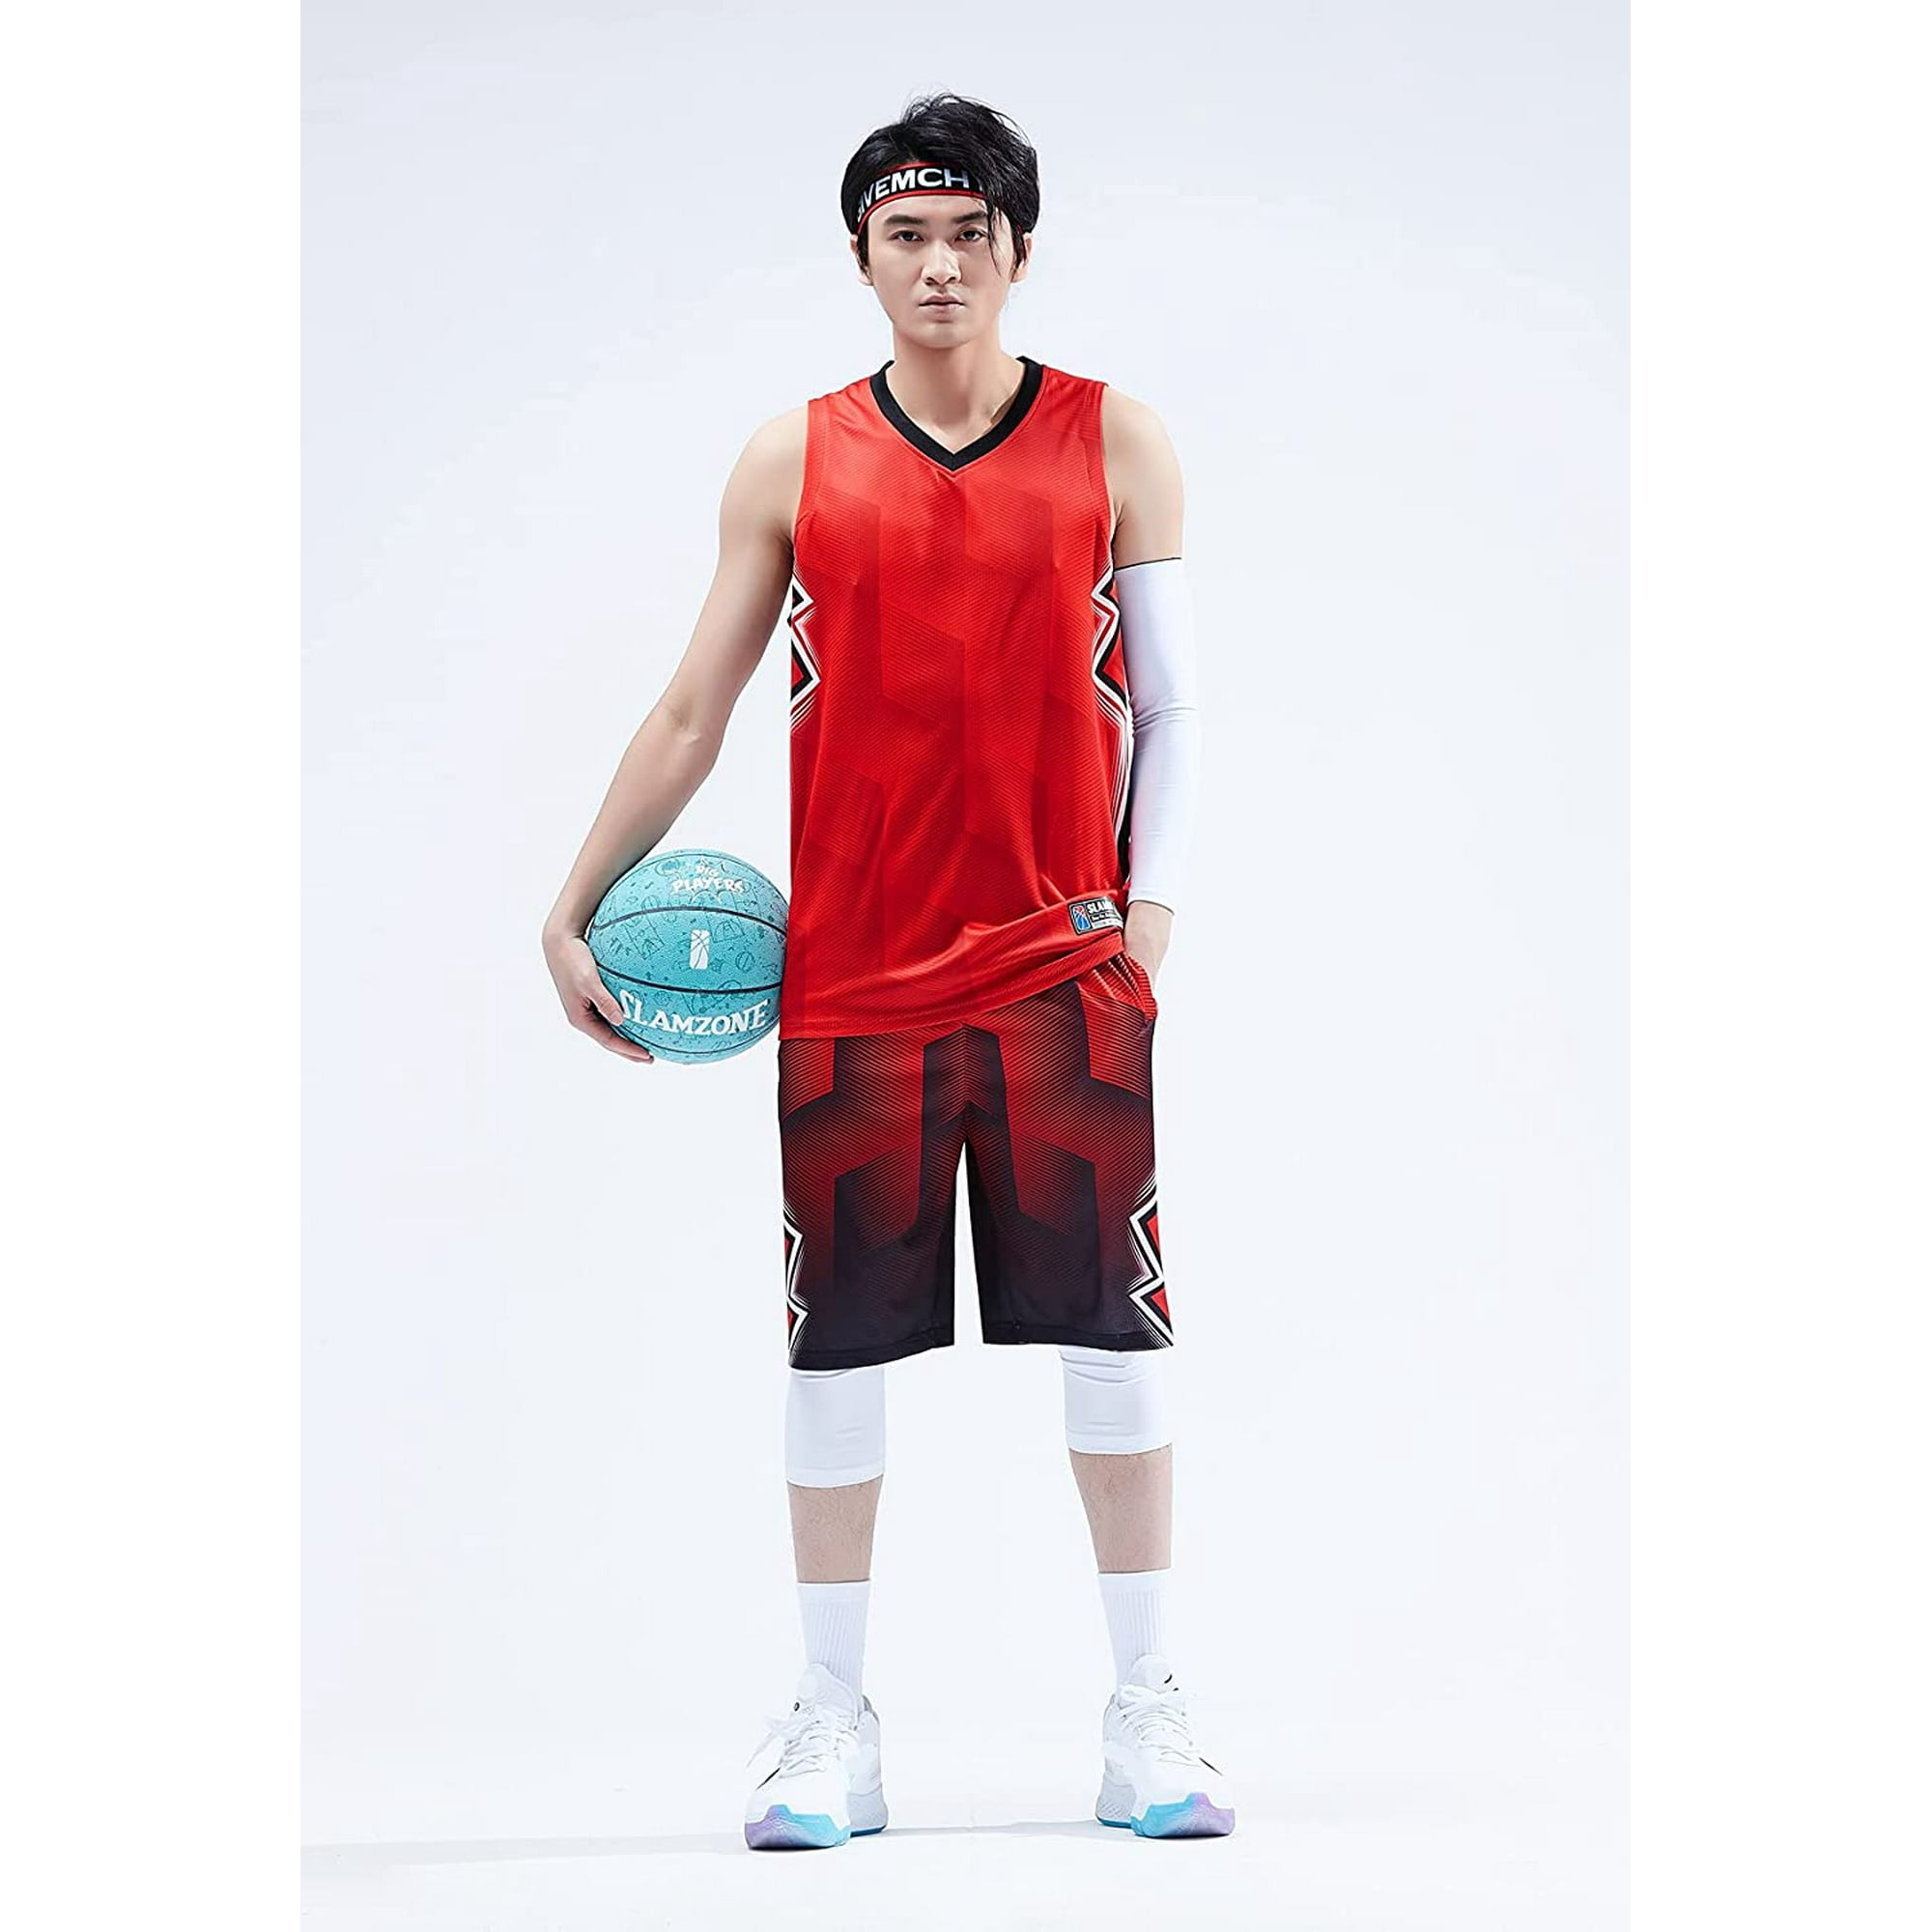 Topeter Men’s Basketball Jersey and Shorts Team Uniform with Pockets Sportswear Uniform